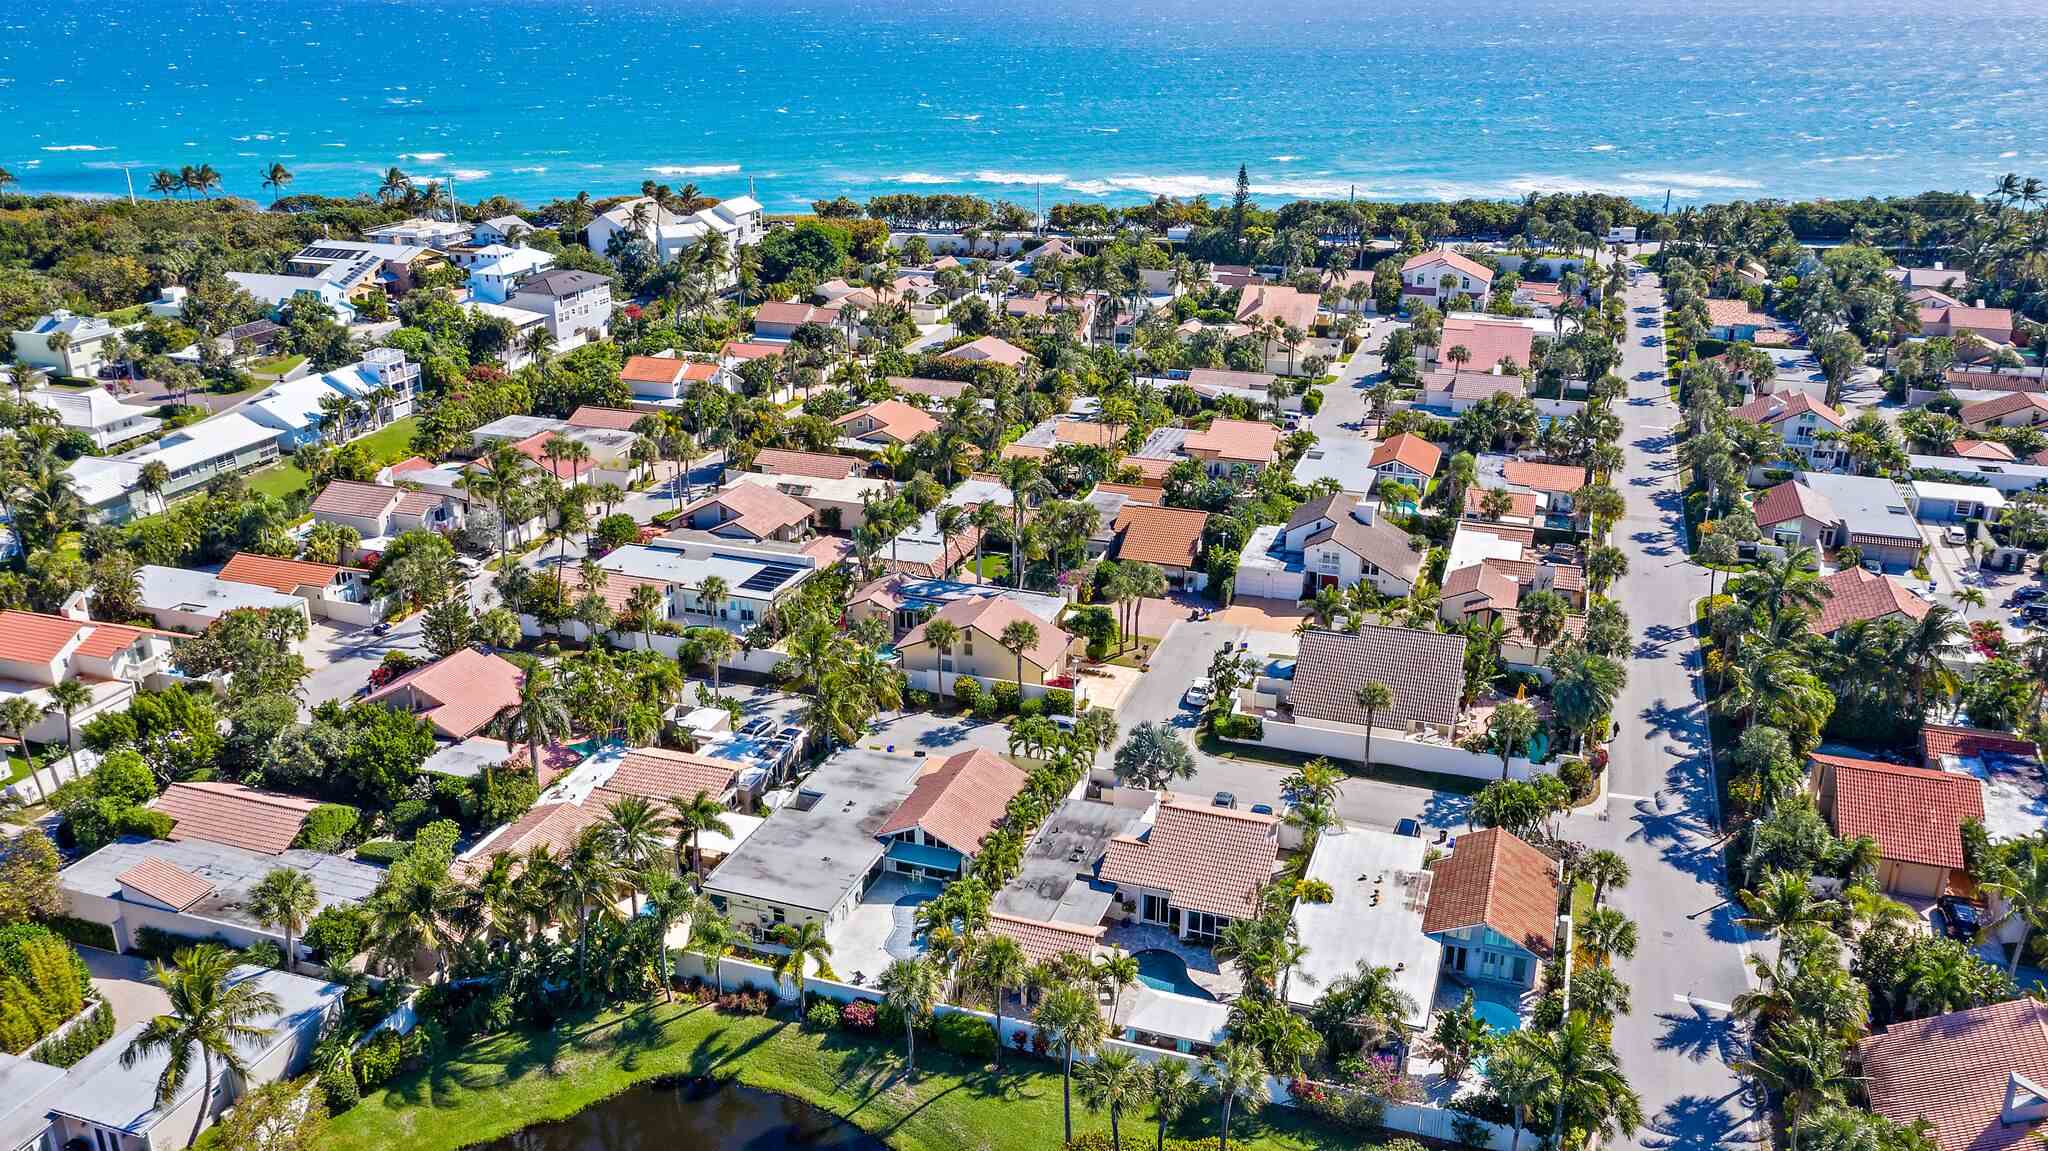 Photo of the overhead view of houses, streets, and palm trees in Oceanside with the ocean in the background